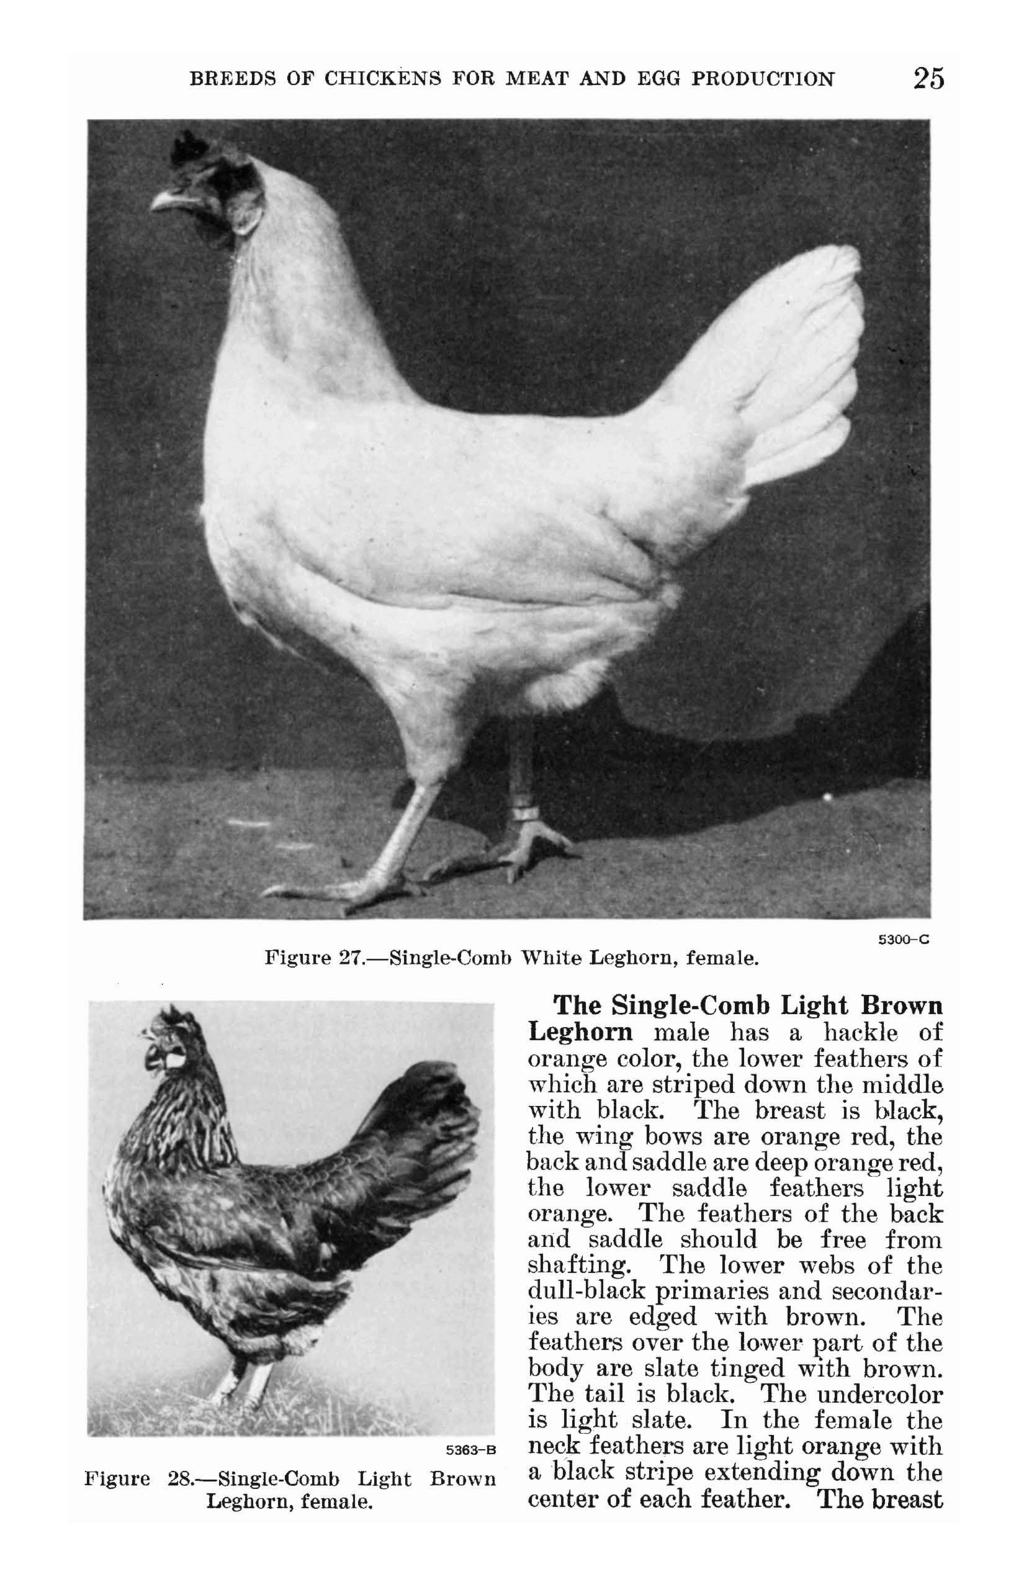 BREEDS OF CHICKENS FOR MEAT AND EGG PRODUC'fION 25 Figure 27.-Single-Comb White Leghorn, female.